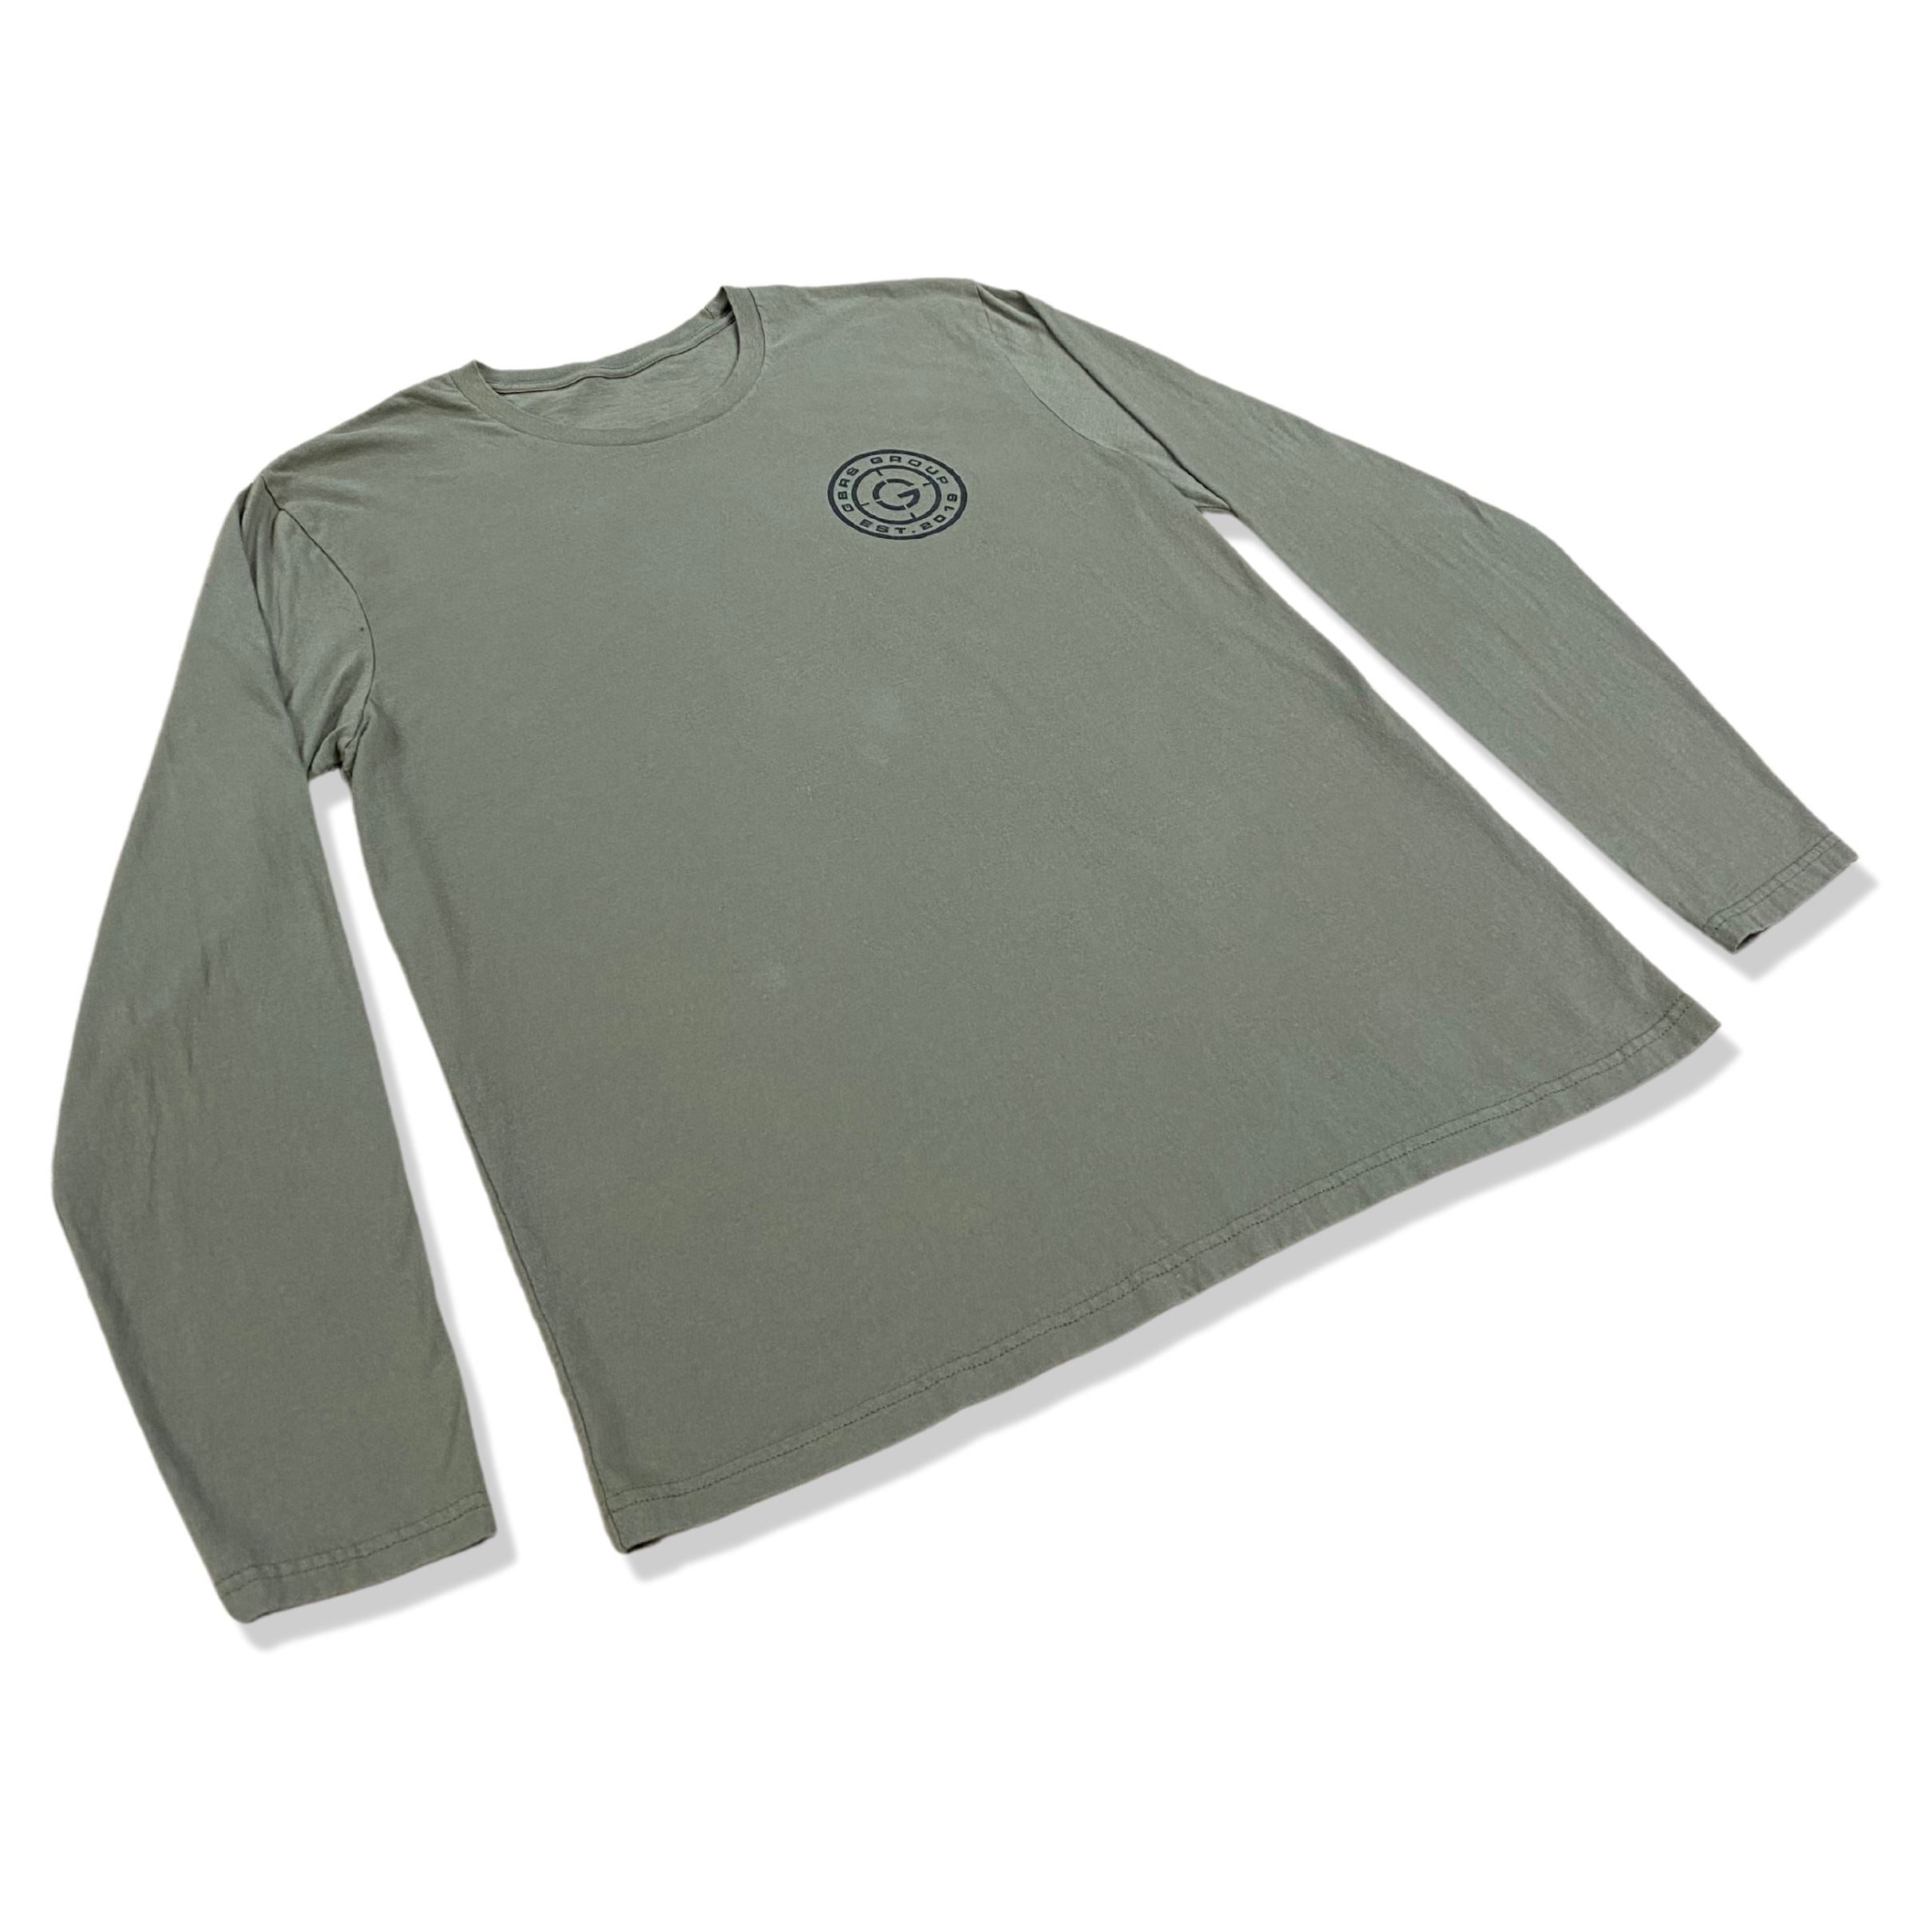 GBRS Group Instructor LS Tee 2022 Graphic Tee GBRS Group 